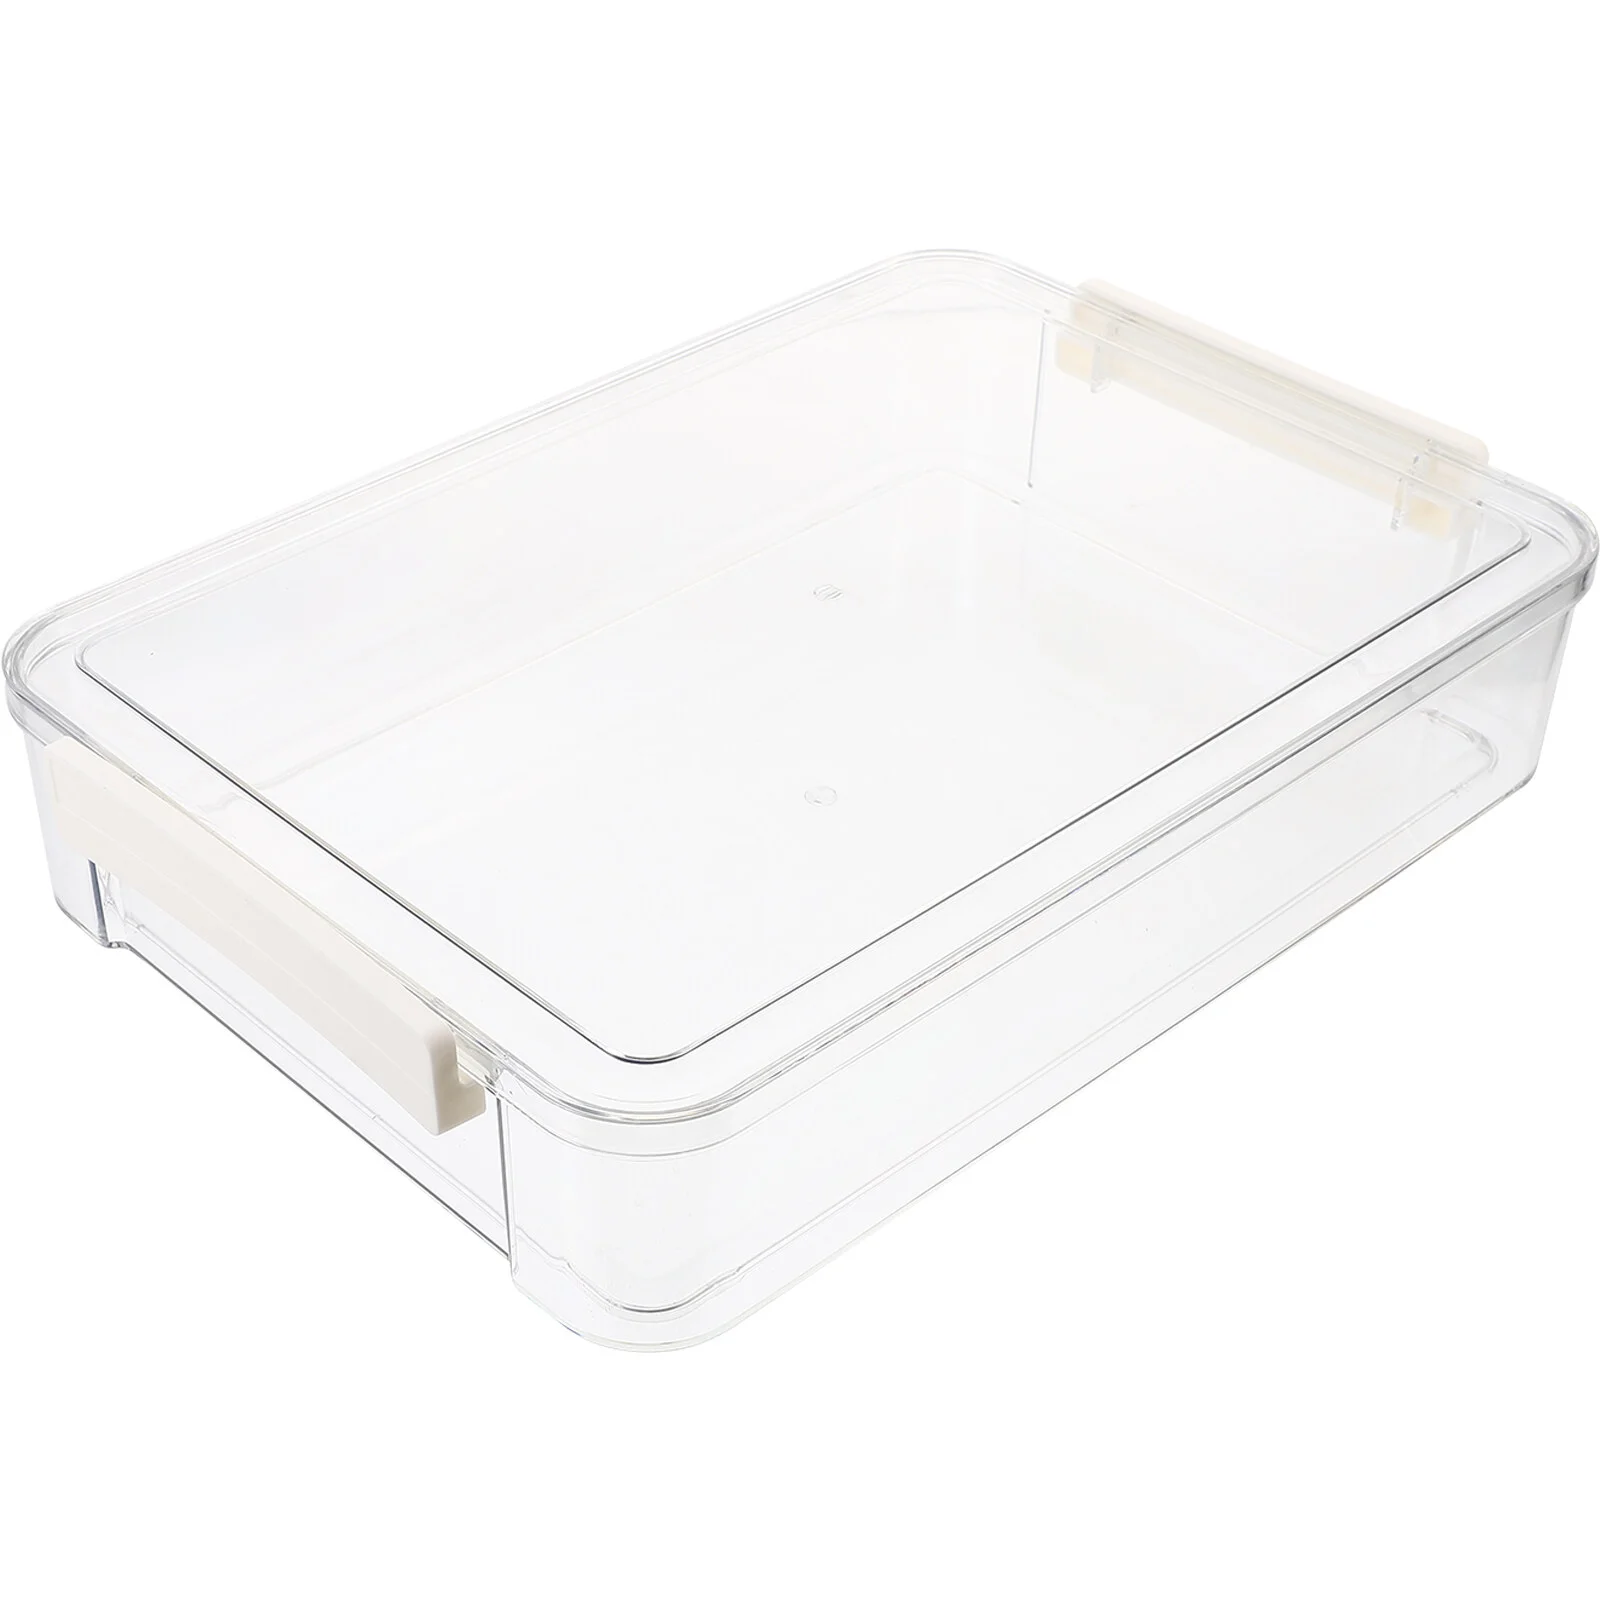 

Organizer Plastic Bin Lid Document Clear Container Containers Organizing Storage Bins Lids Case